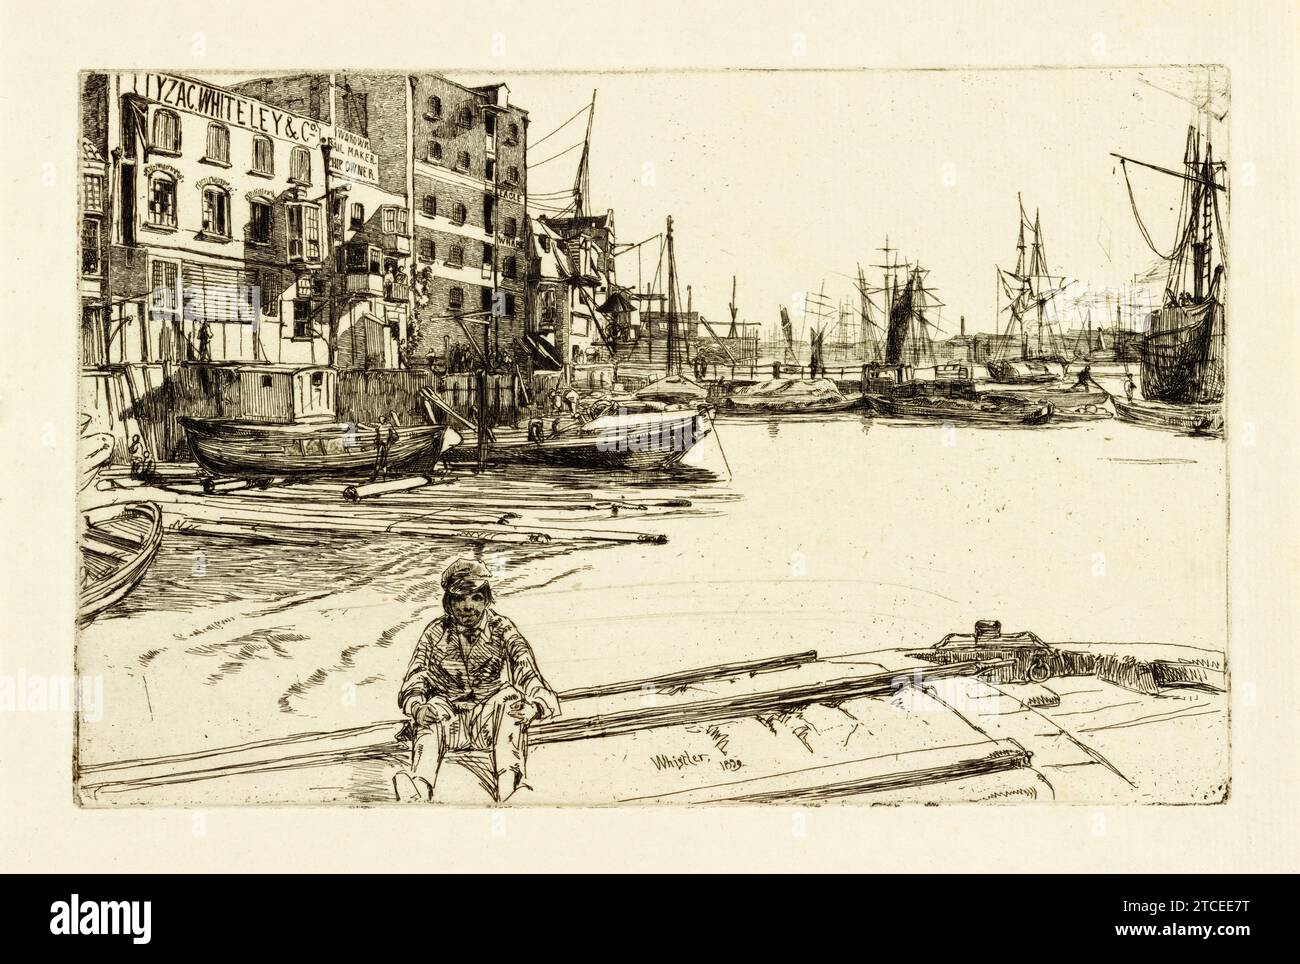 James Abbott McNeill Whistler etching, Eagle Wharf, landscape drawing, 1859 Stock Photo